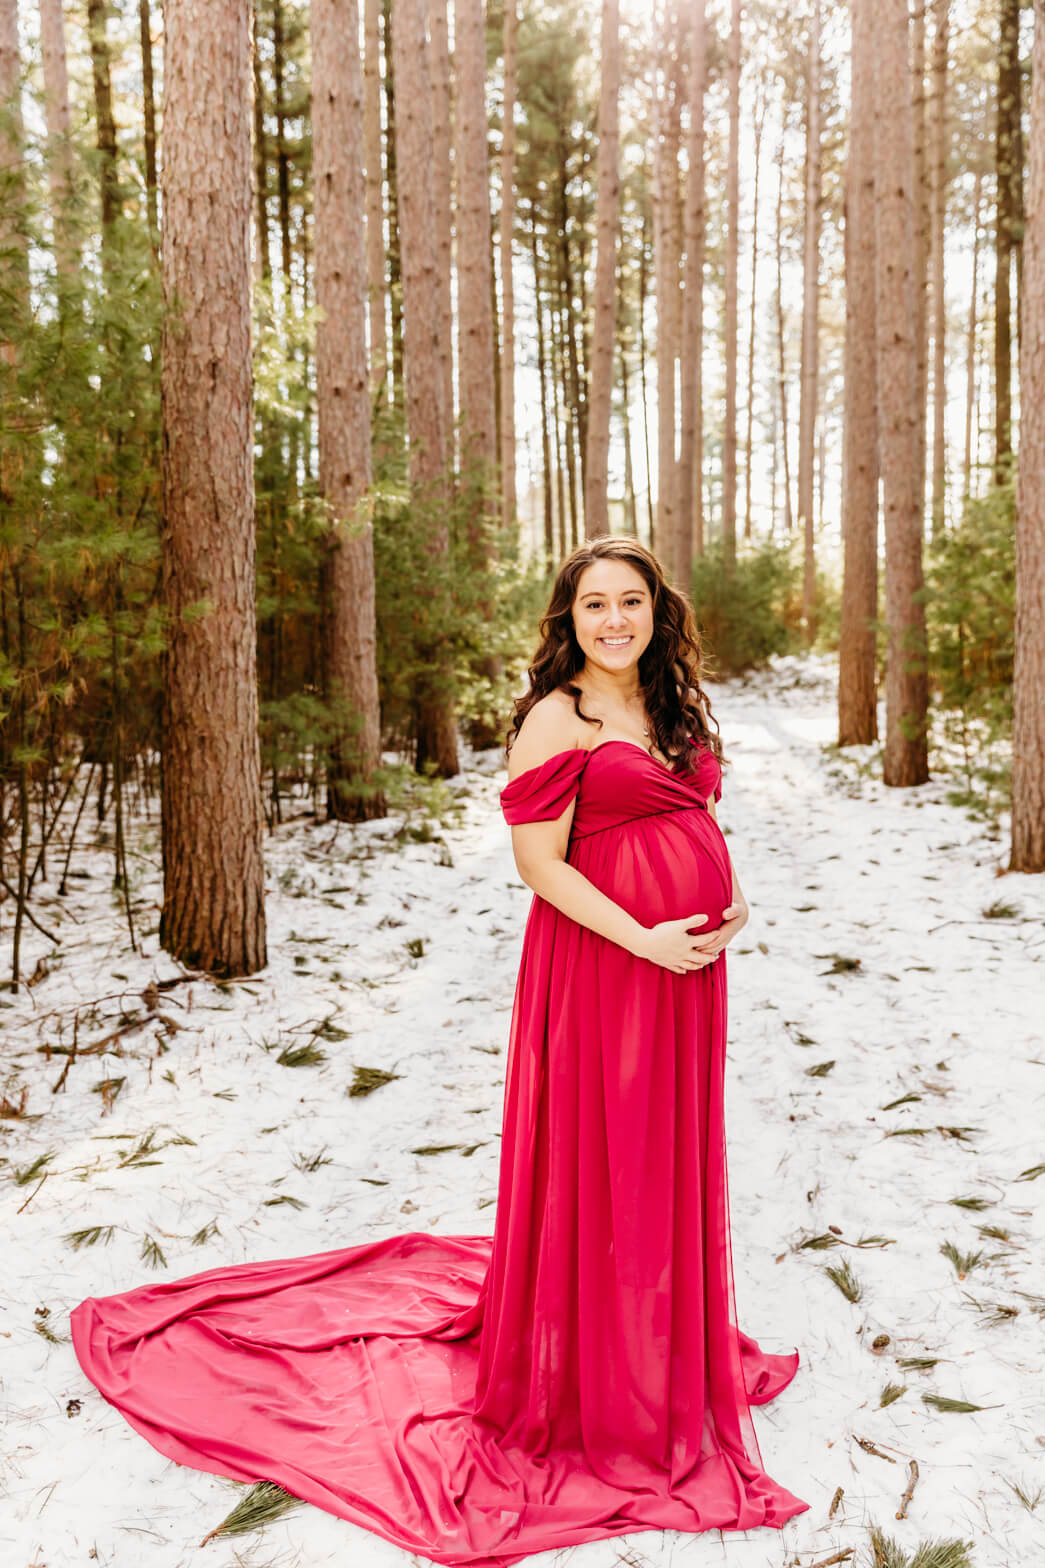 A mom to be in a long flowing maternity gown holds her bump with standing in a snow covered path through a pine forest